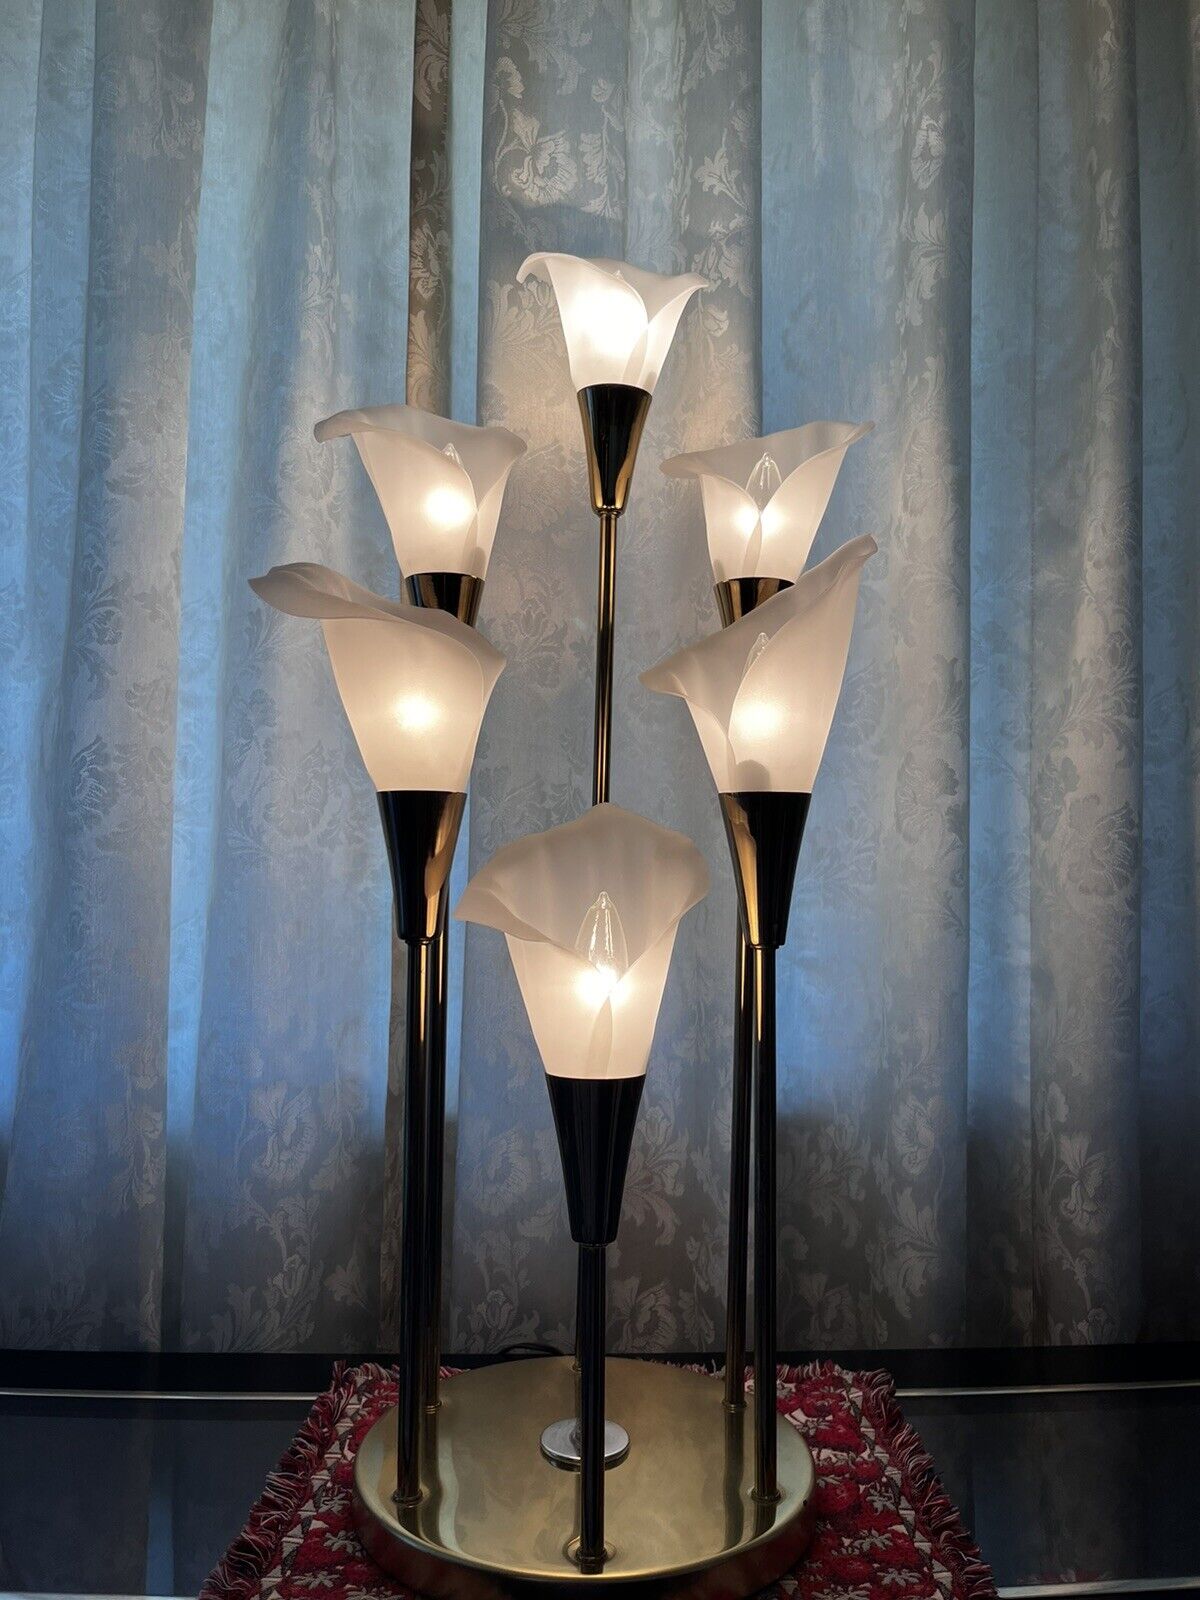 1960s Calla Lily 6 Light Table Lamp